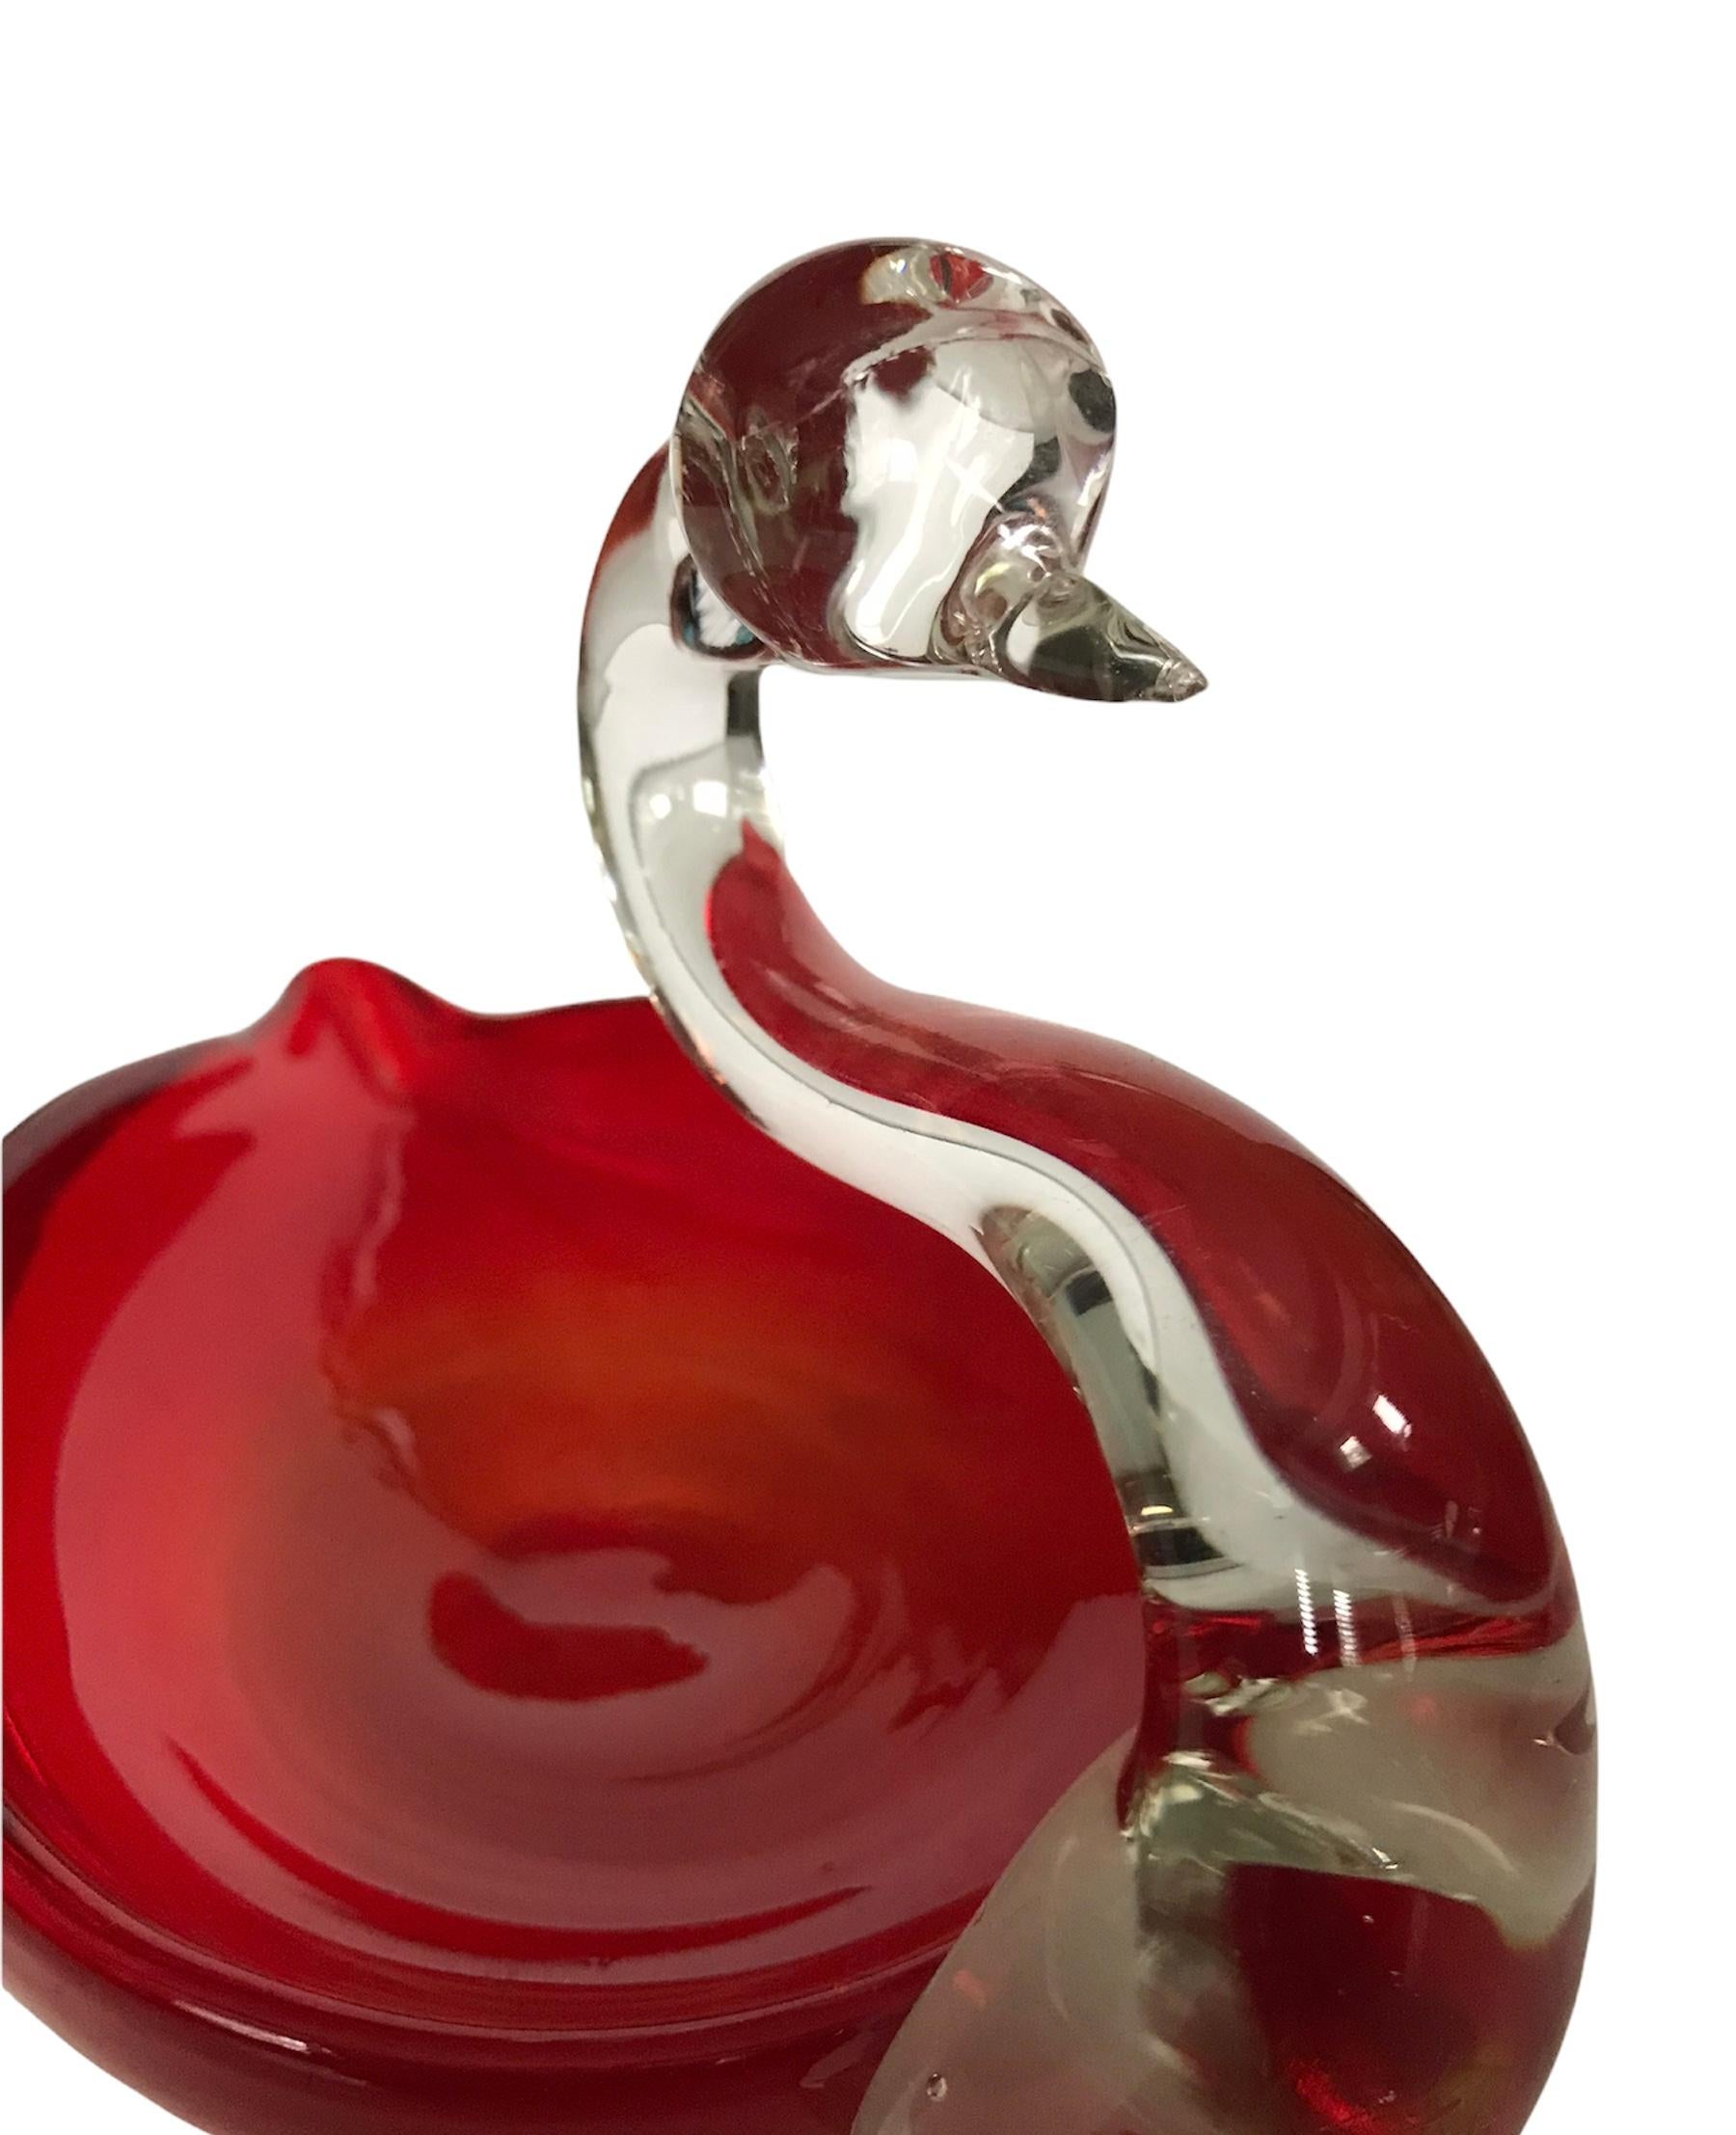 Extraordinary mid 20th century cherry red piece of art glass. Gorgeous delicate swan candy dish, in a two-tone clear glass head/neck and cherry body bowl. In the style of Murano Italy.